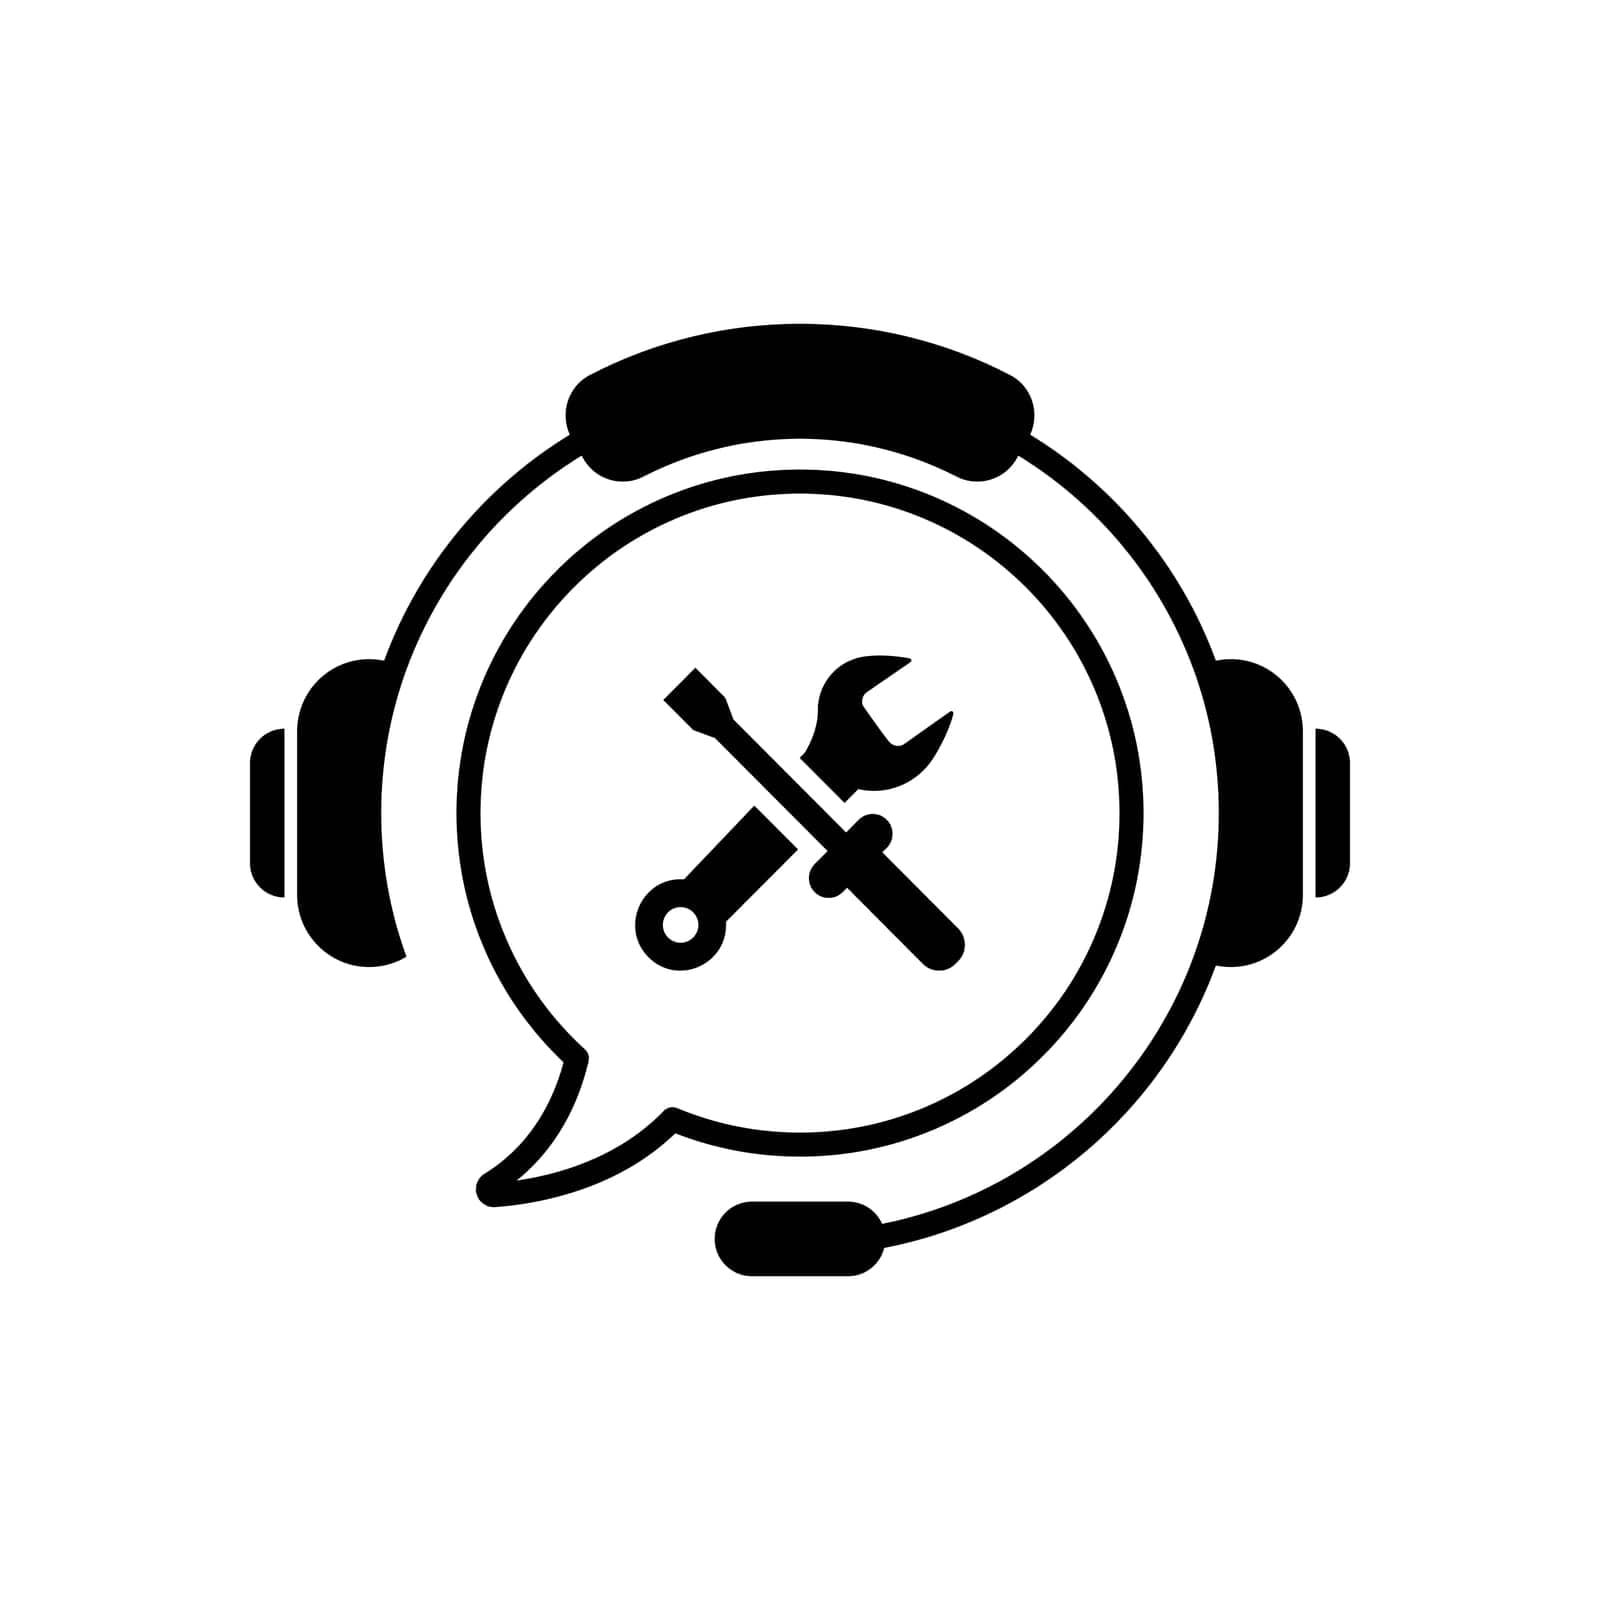 Technical Support Customer Service Line Icon. Headphones and Repair Tools Outline Pictogram. Online Information Hotline and Customer Helpline. Vector Illustration by Toxa2x2